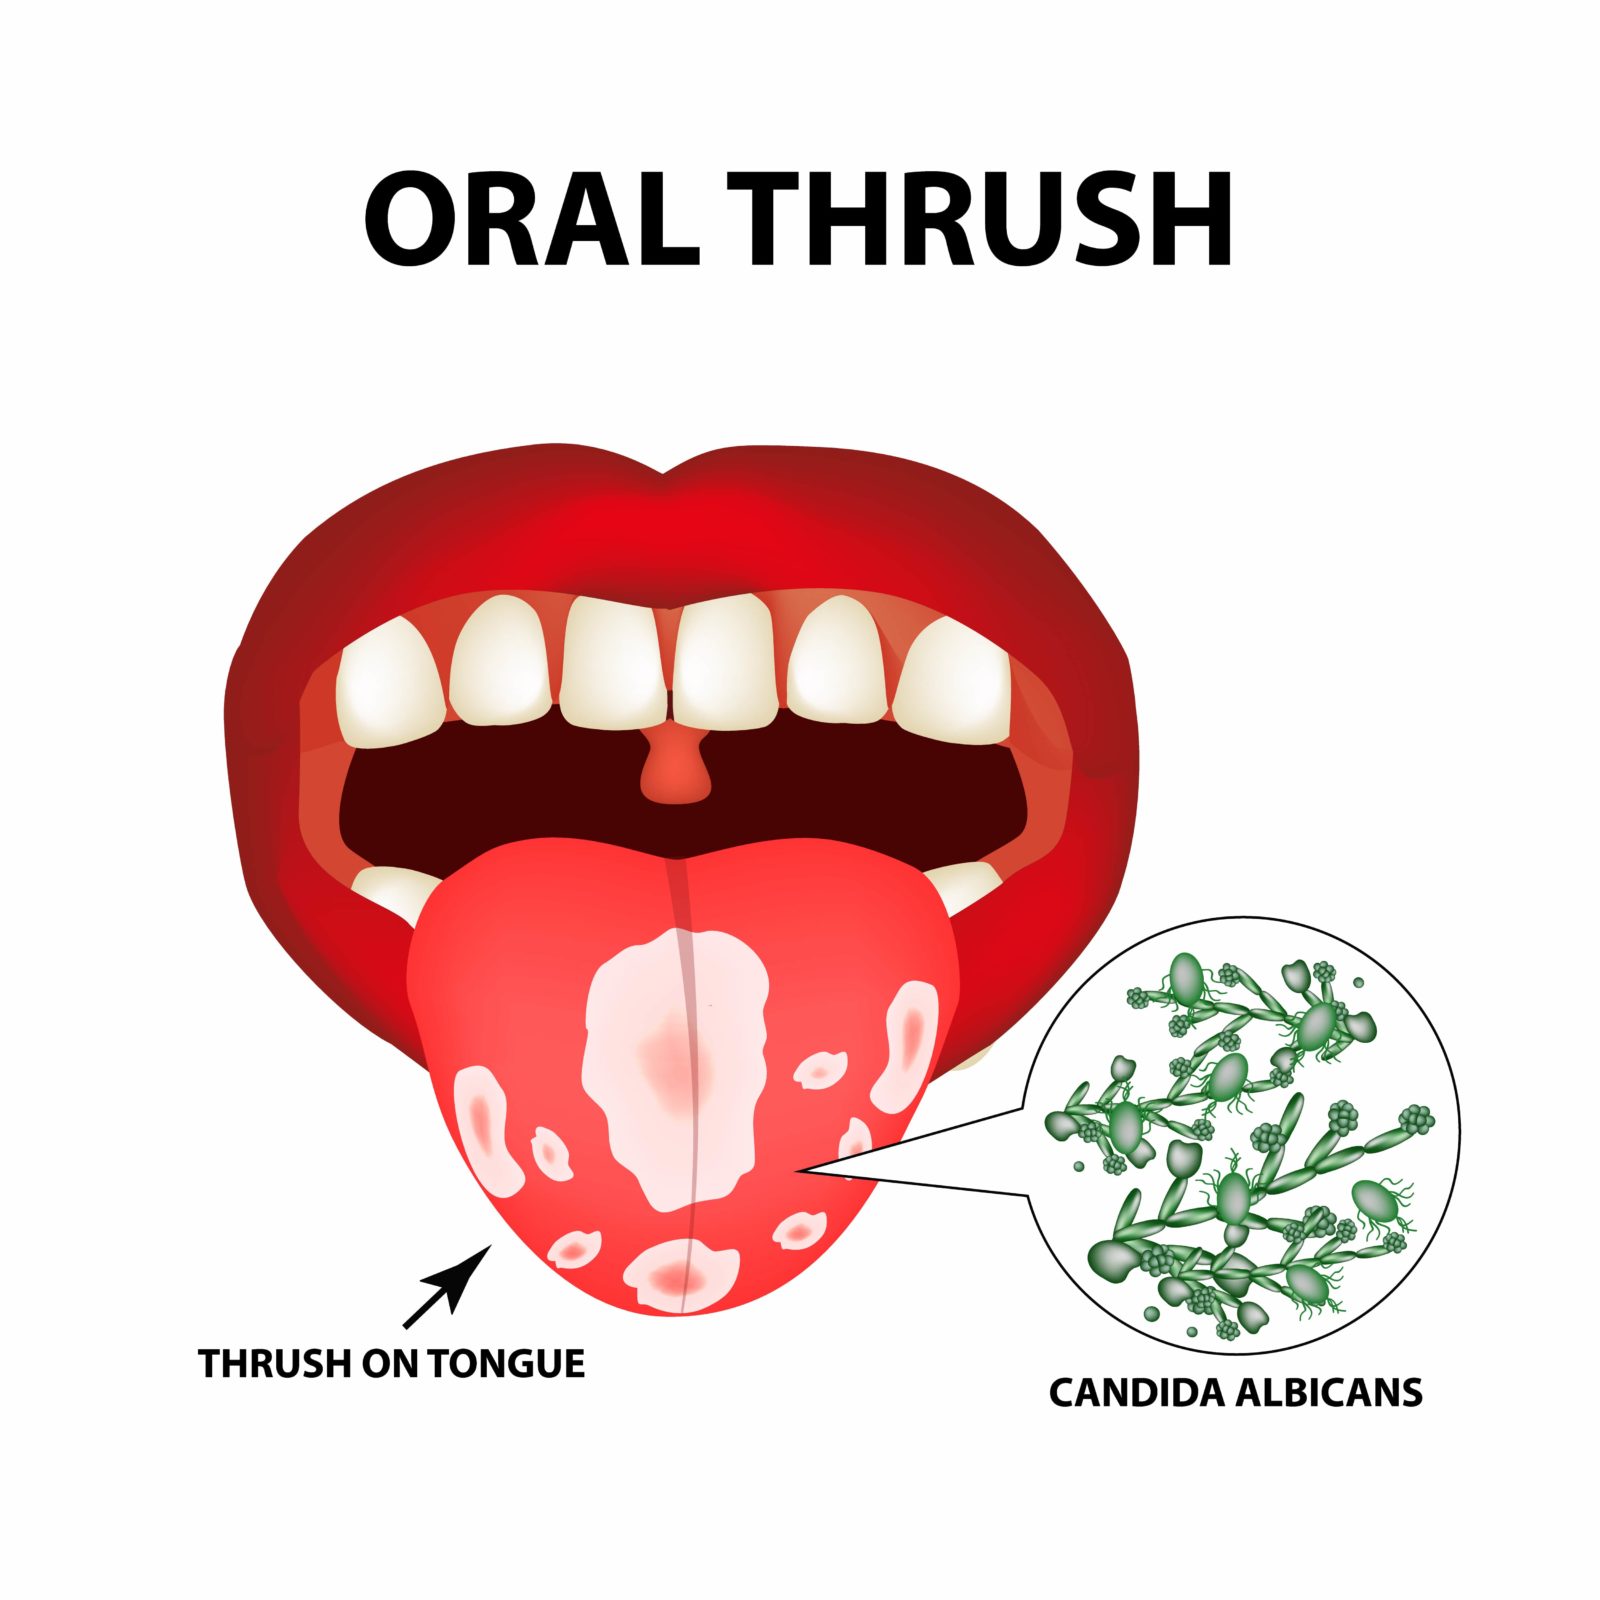 diagram of oral thrush on the tongue